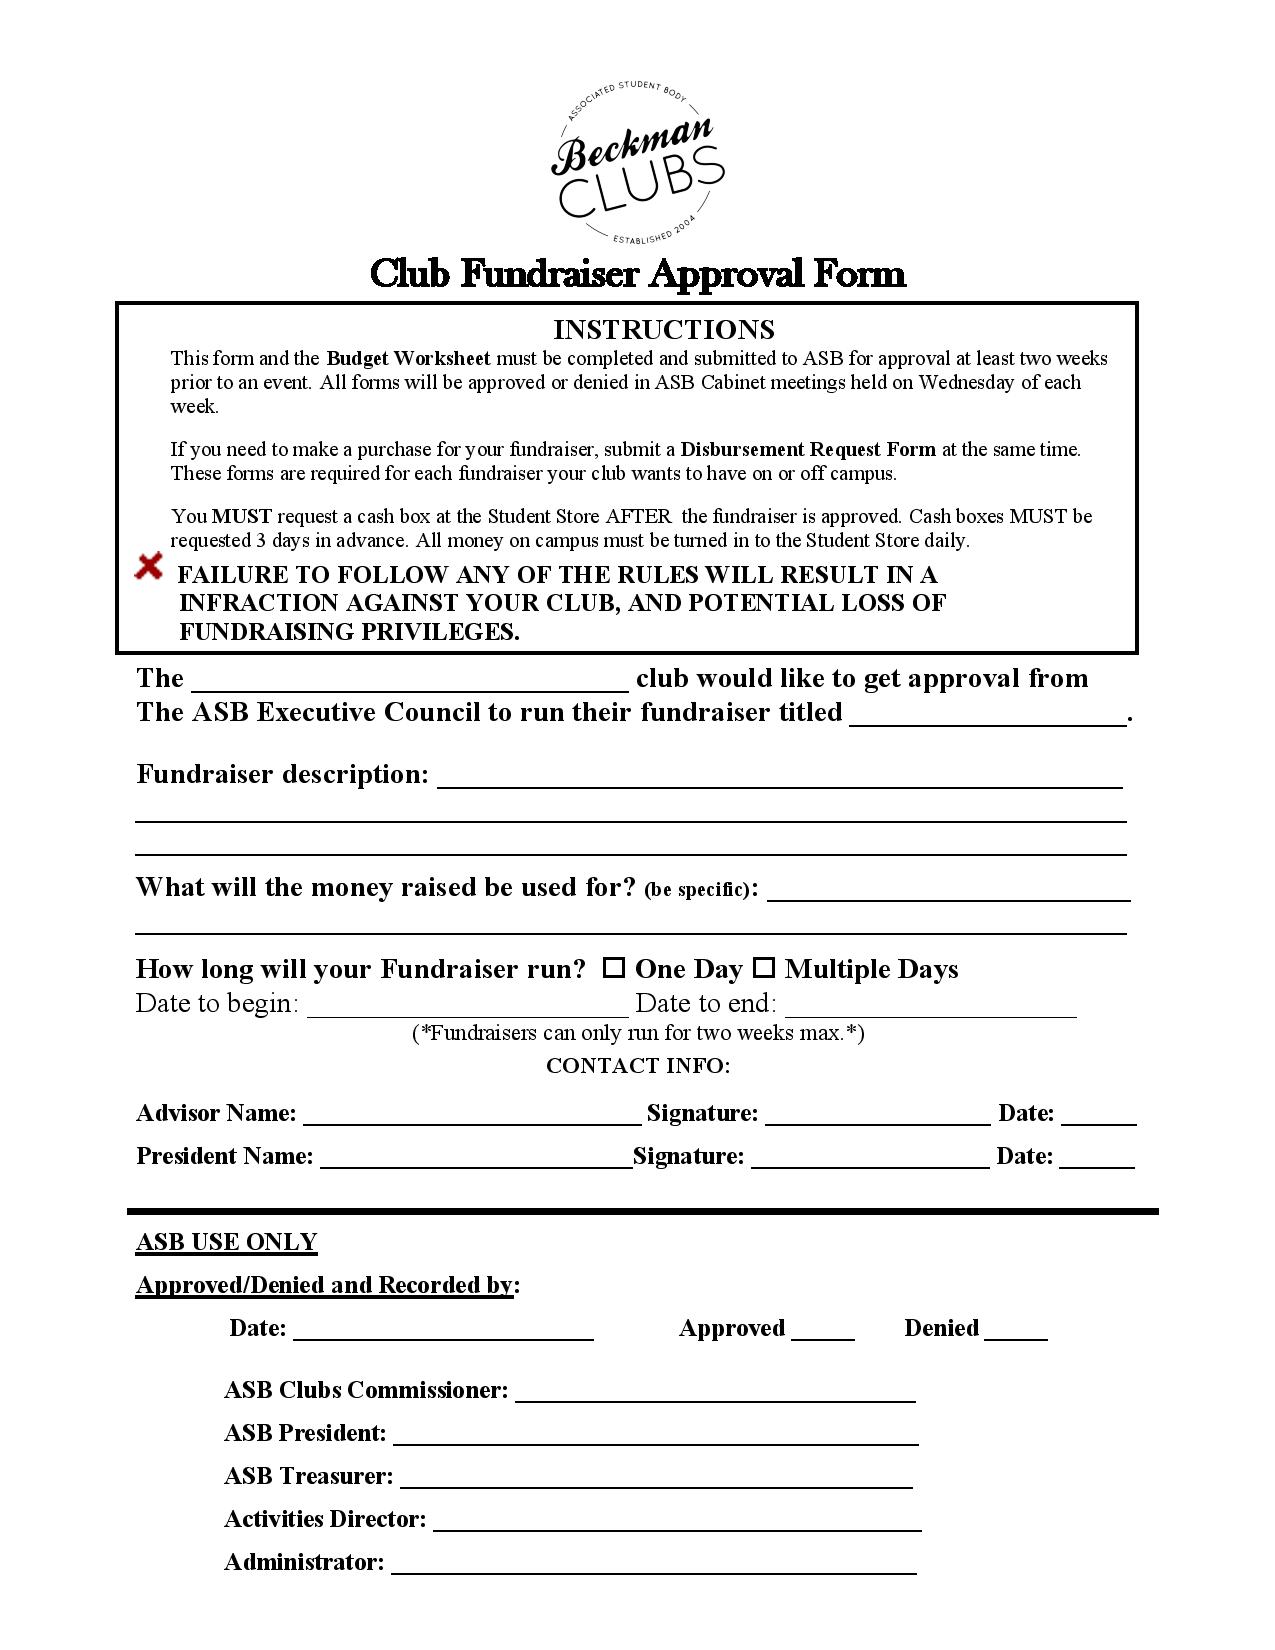 ClubsFundraiserPacket-page-002.jpg